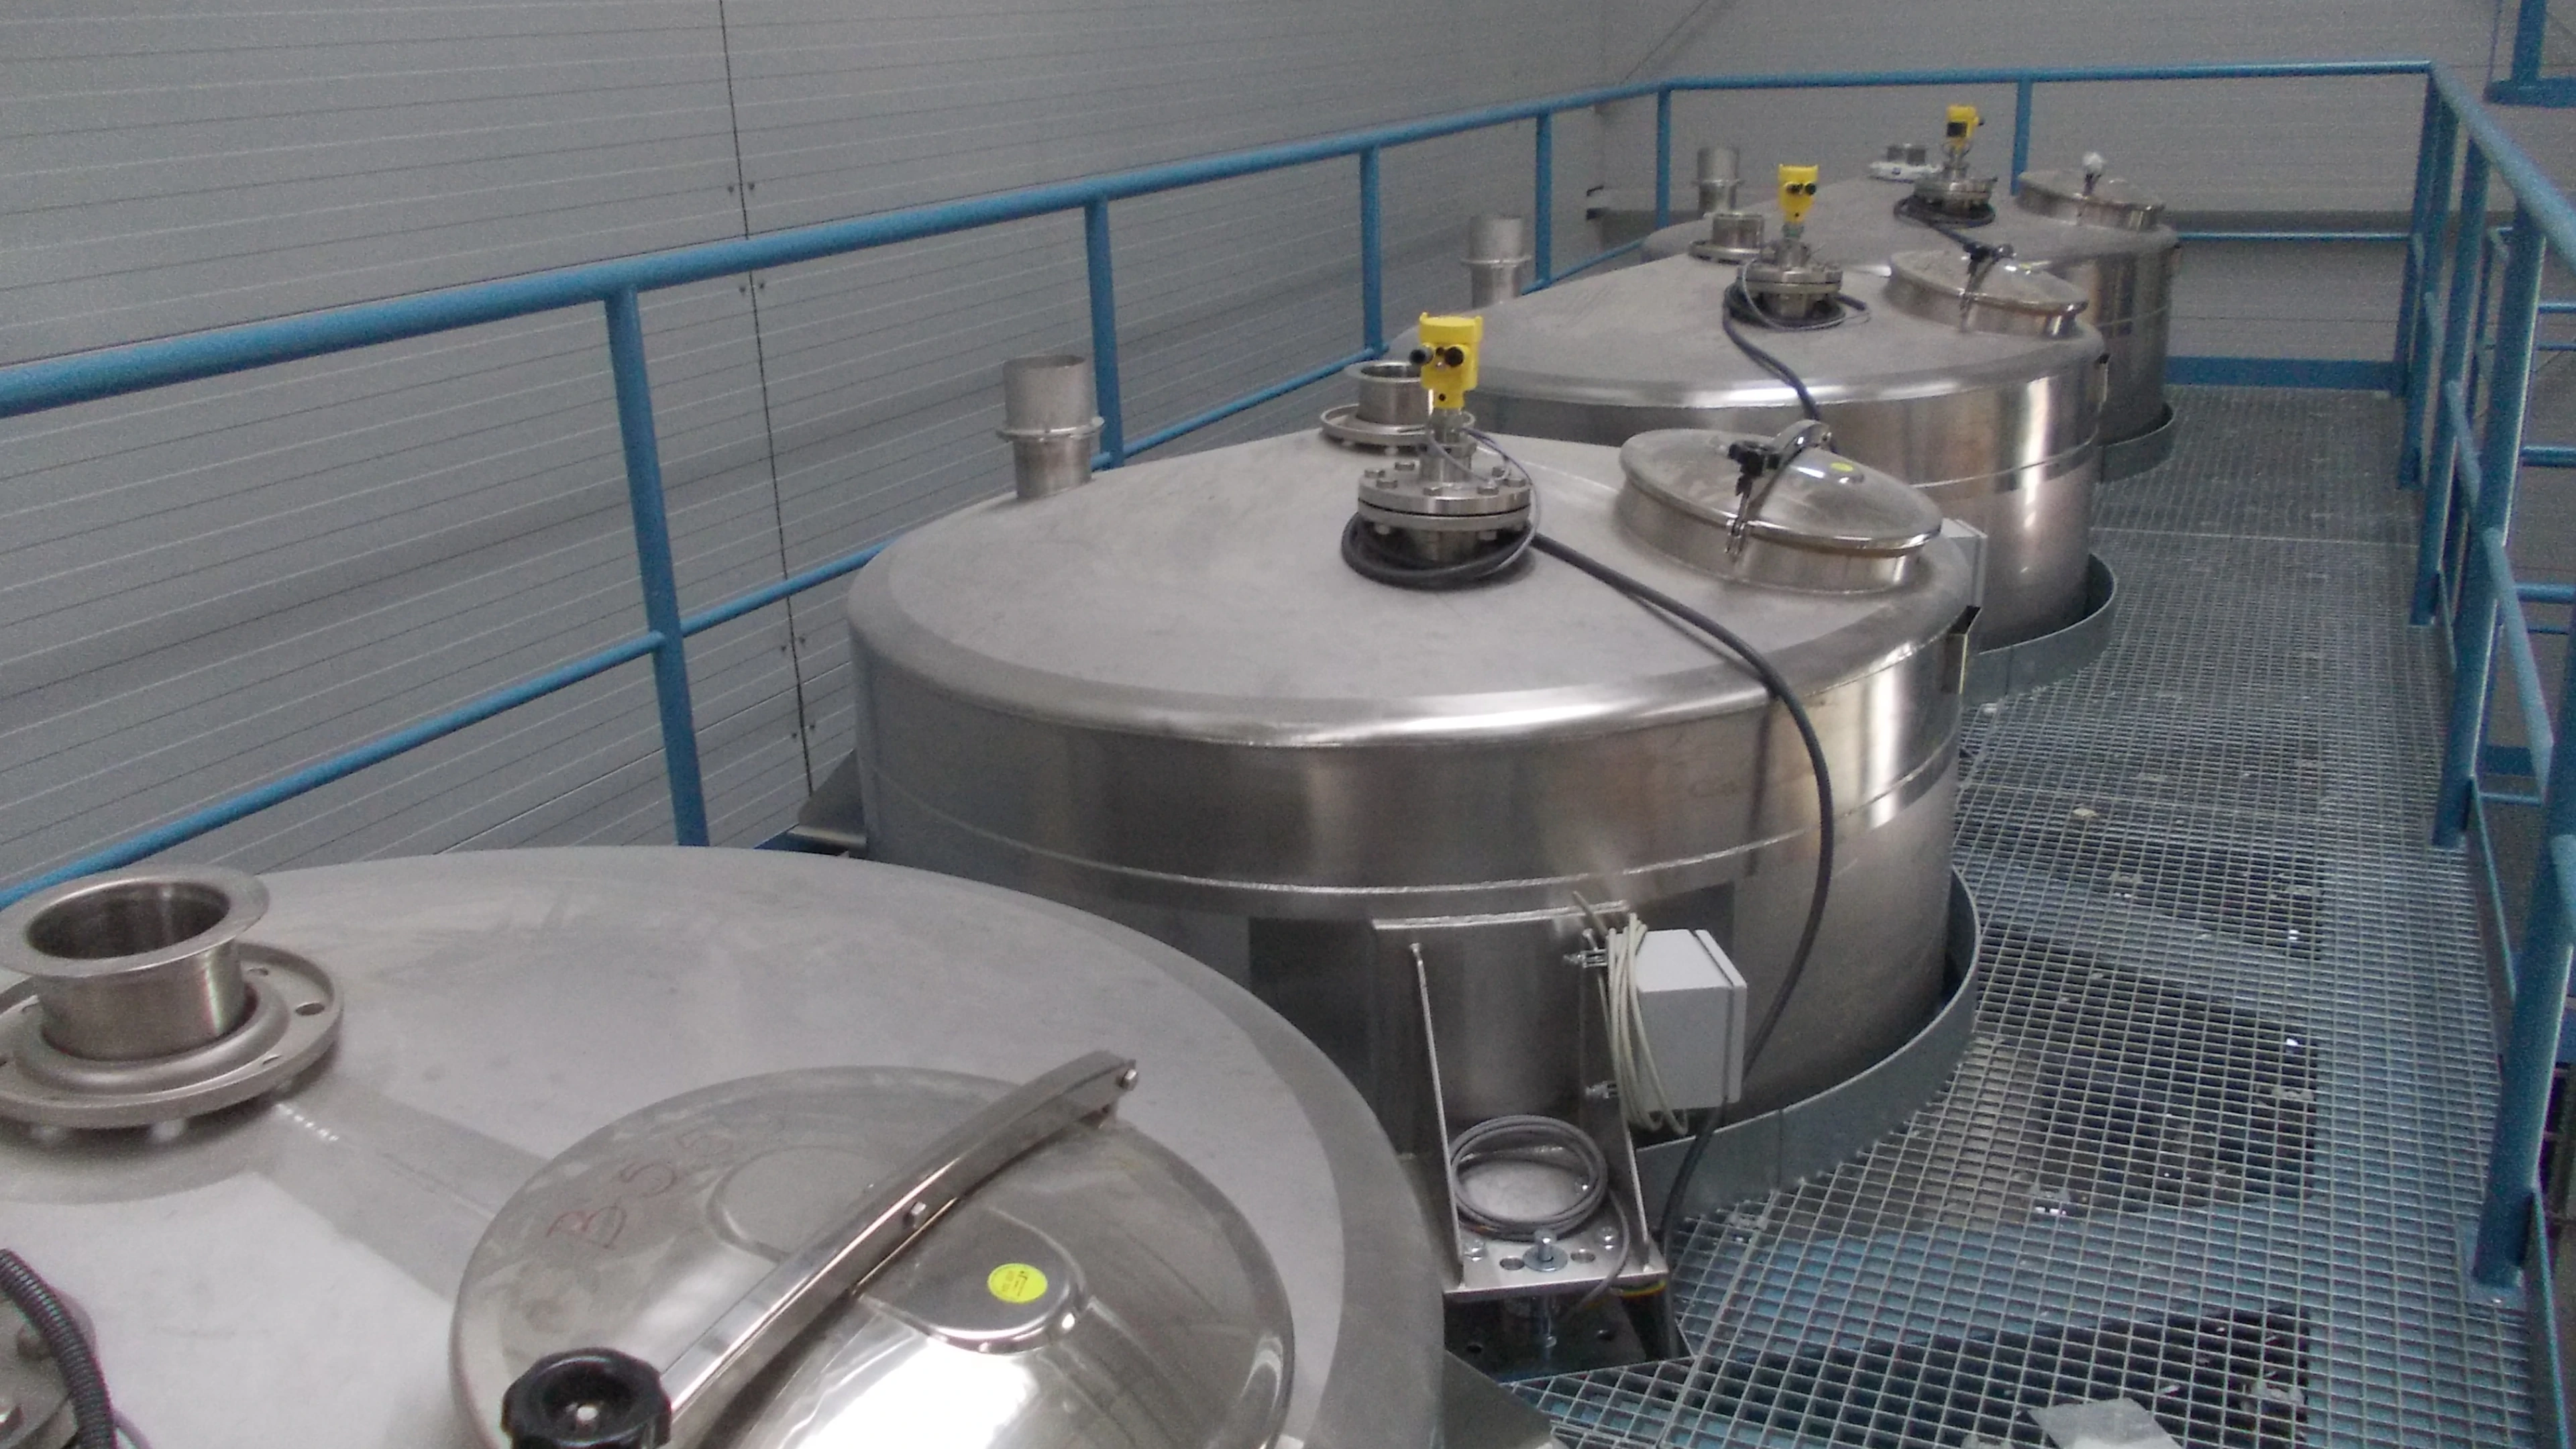 BTL Storage tanks in stainless steel - Chemical Industry – Chemical substances